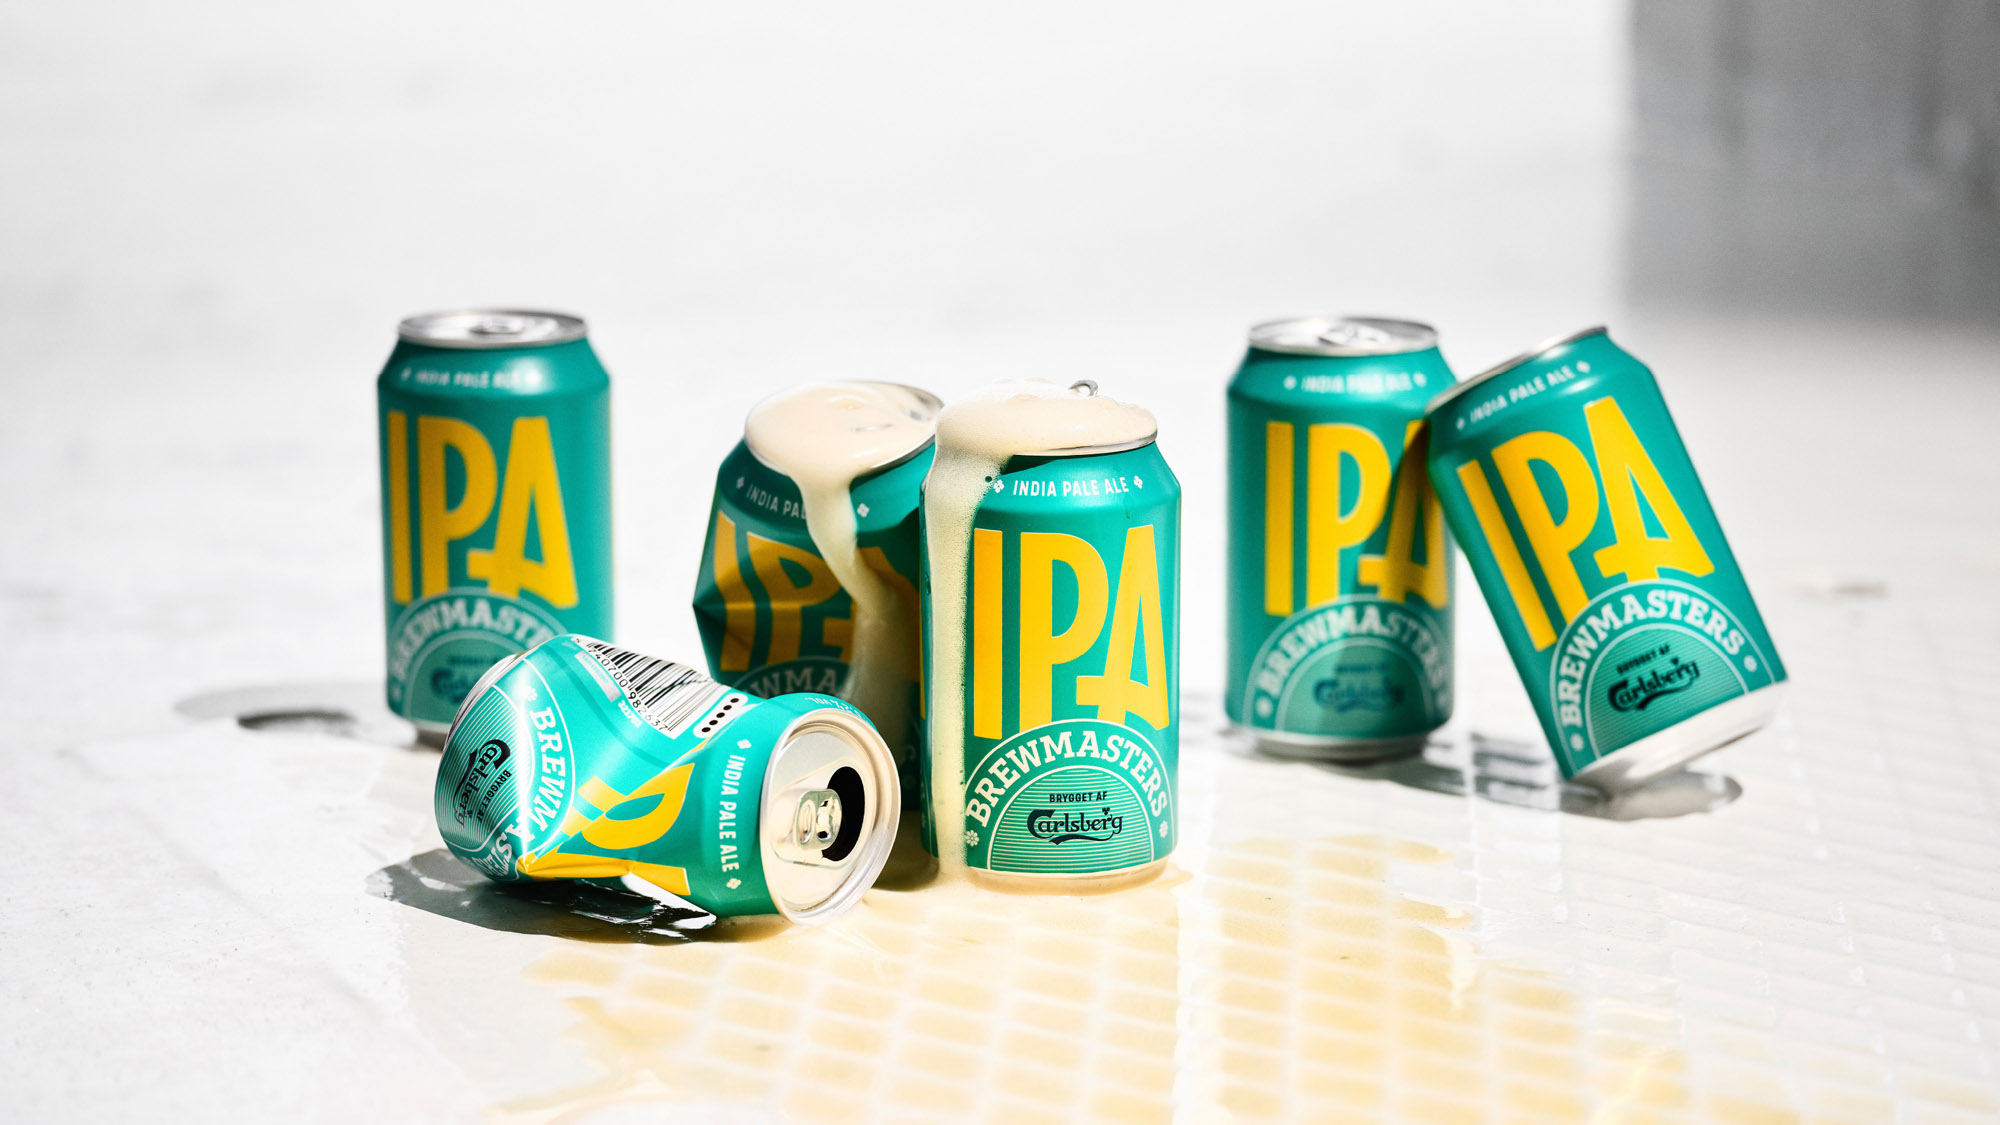 Everland Create New Brewmasters IPA Design From the Gates of Carlsberg